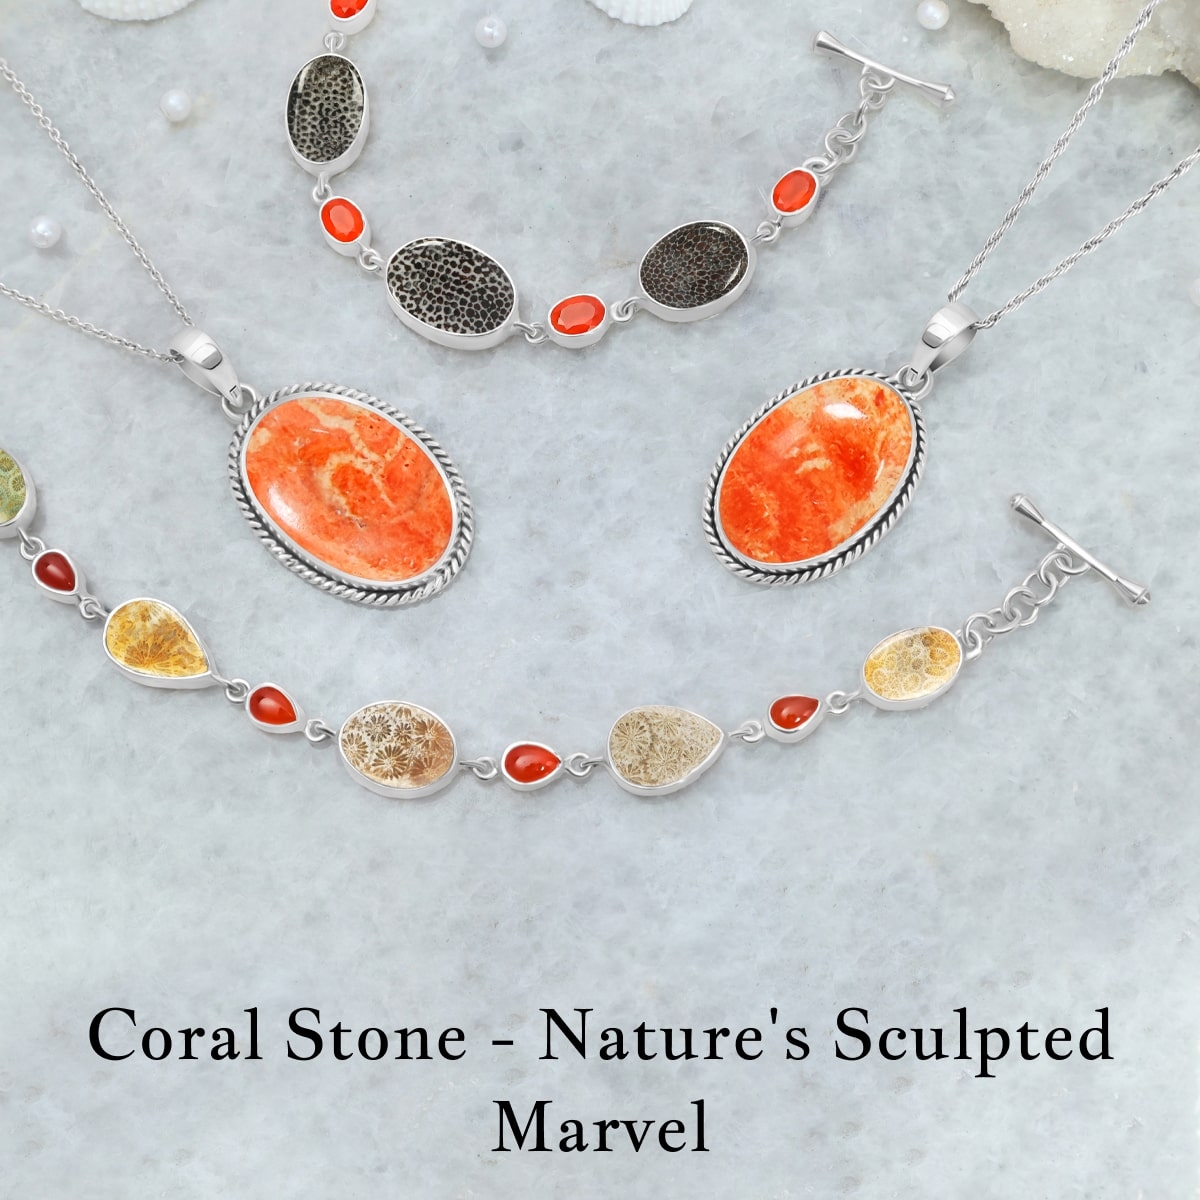 What Is Coral Stone